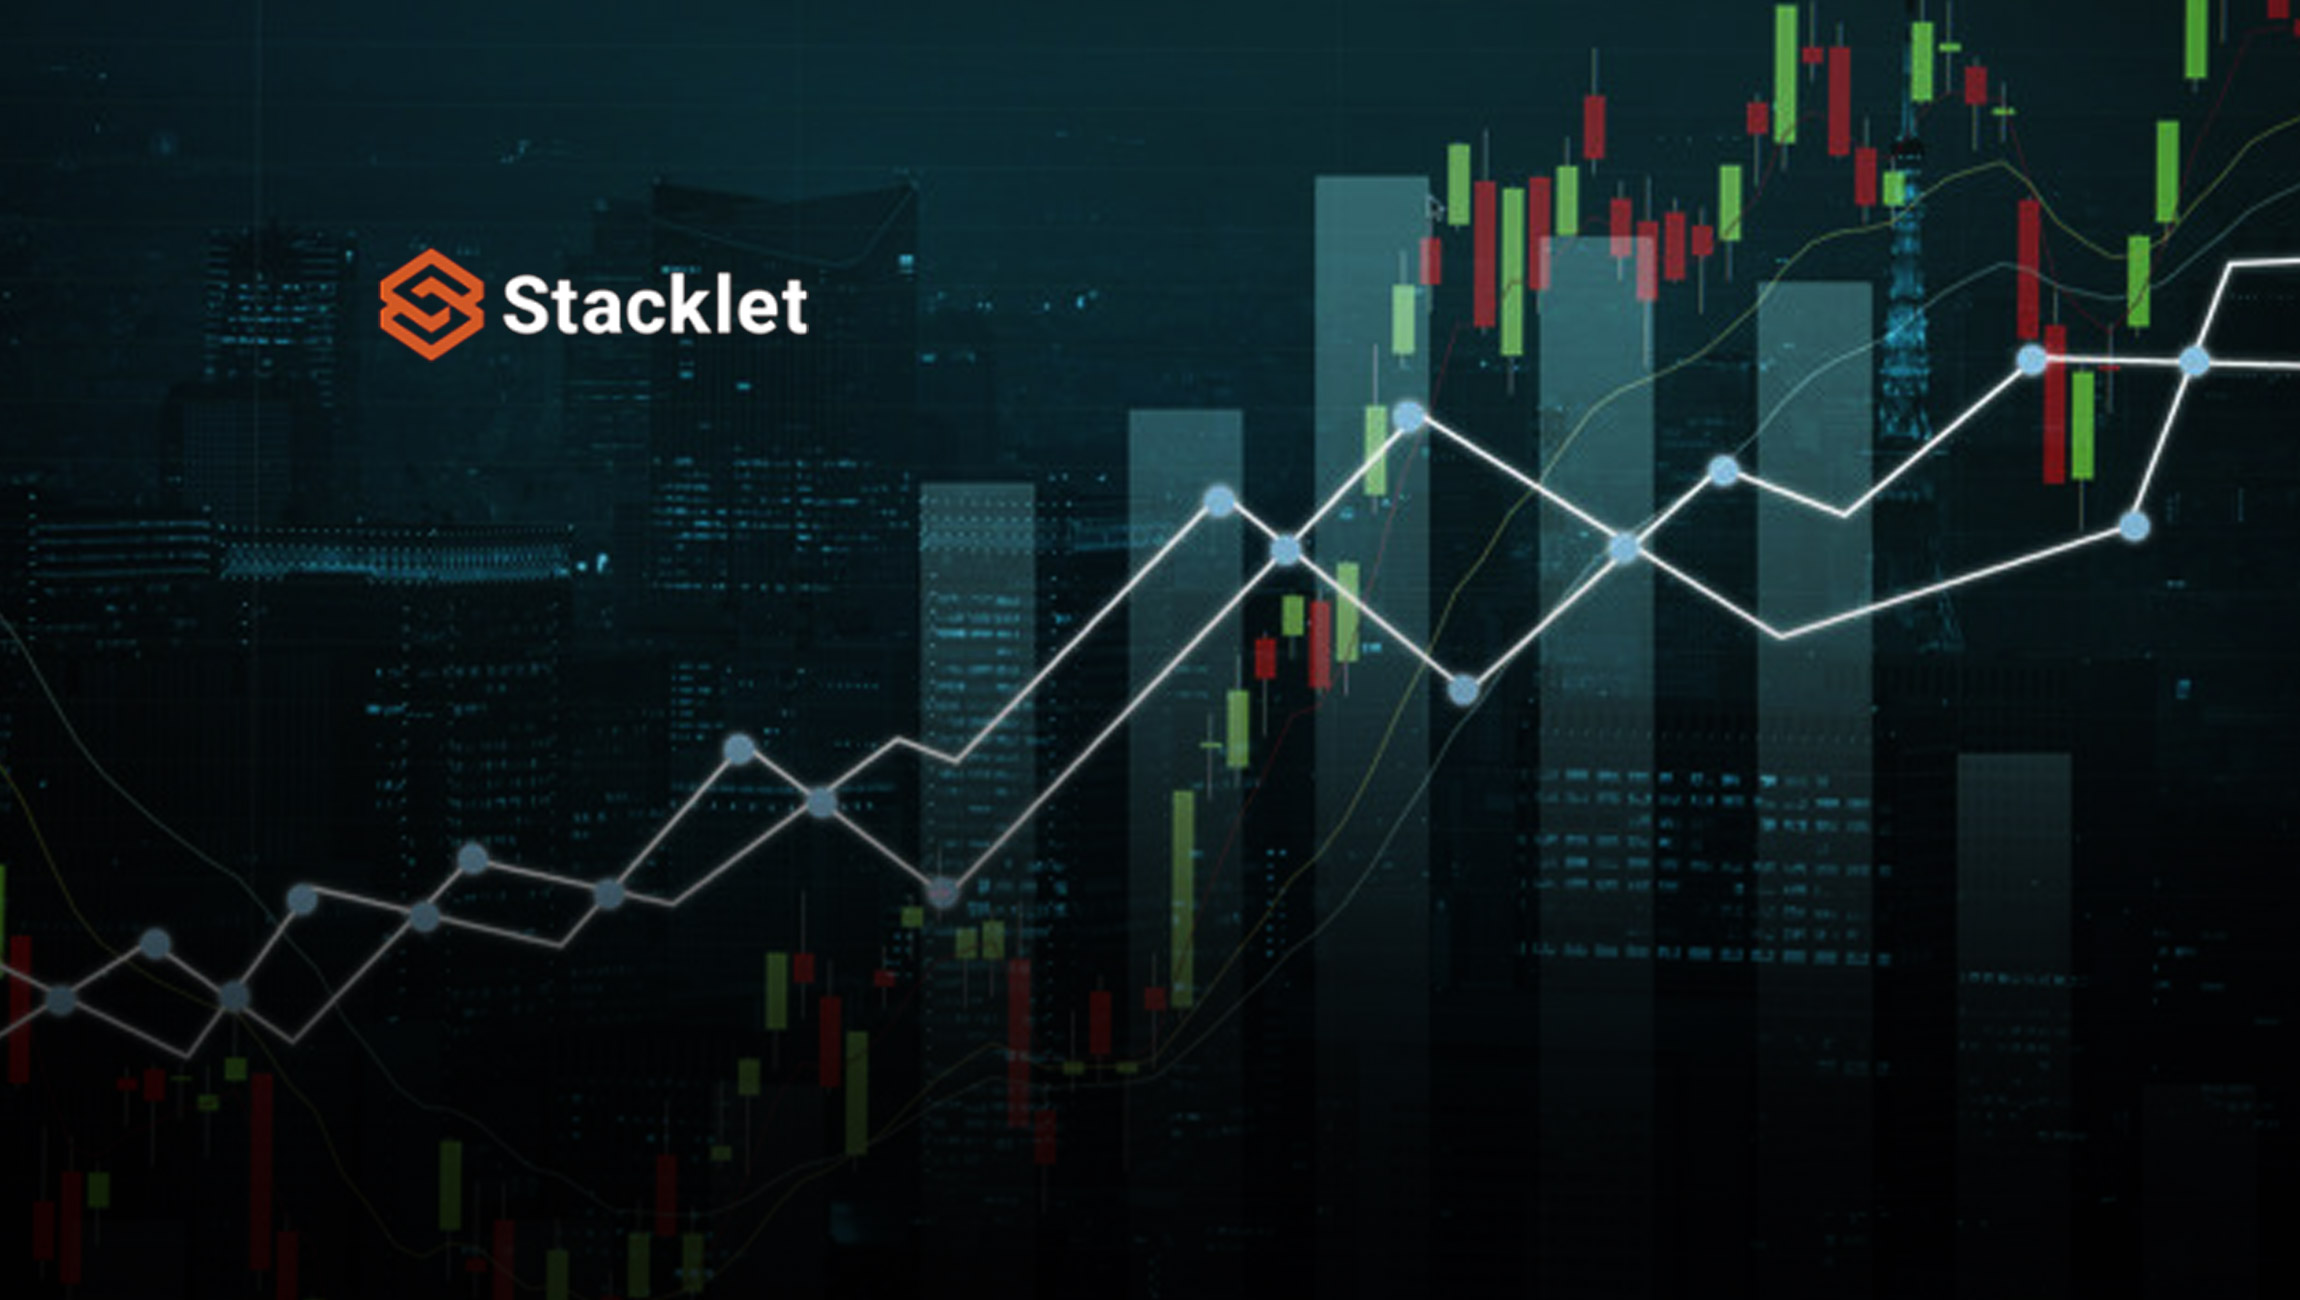 Stacklet’s New Intelligent Communications Capabilities Help Organizations Accelerate Cloud Adoption Through Governance as Code